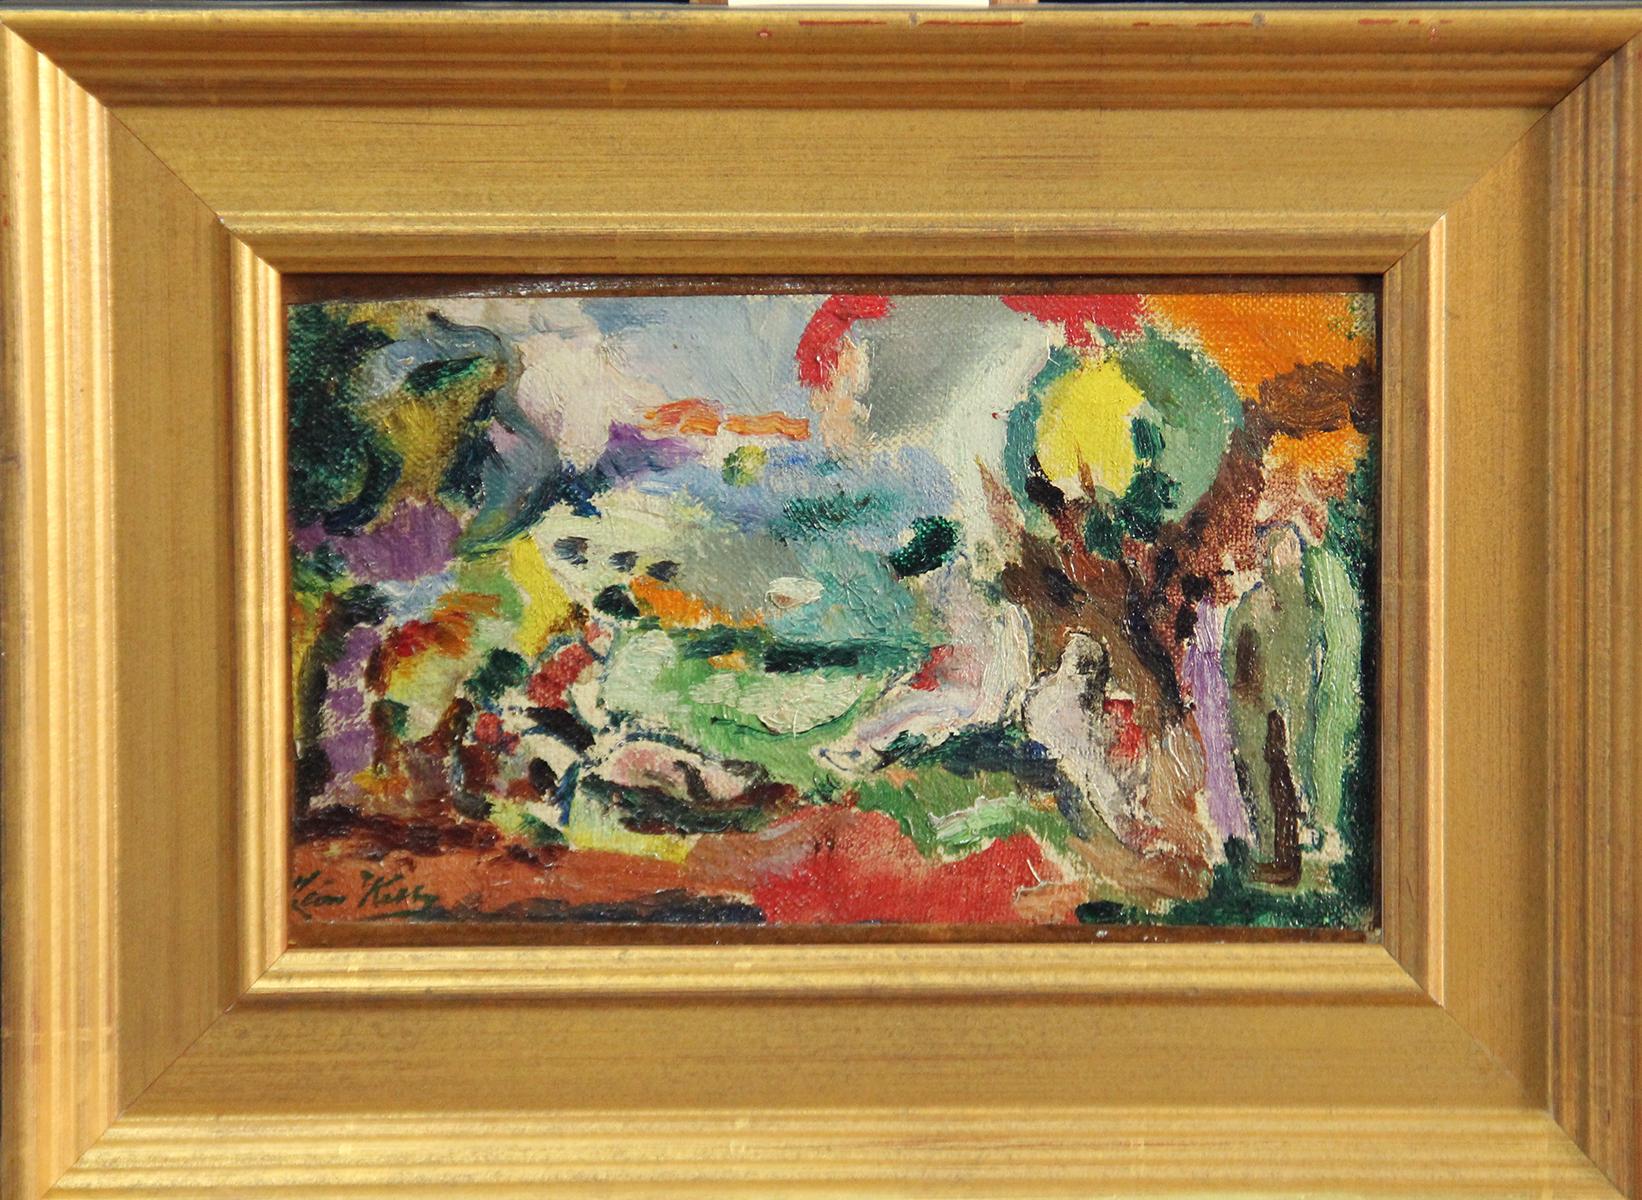 Modernist Abstract Landscape, Oil on Canvas, 1923, Signed and Dated, Framed - Painting by Leon Kelly